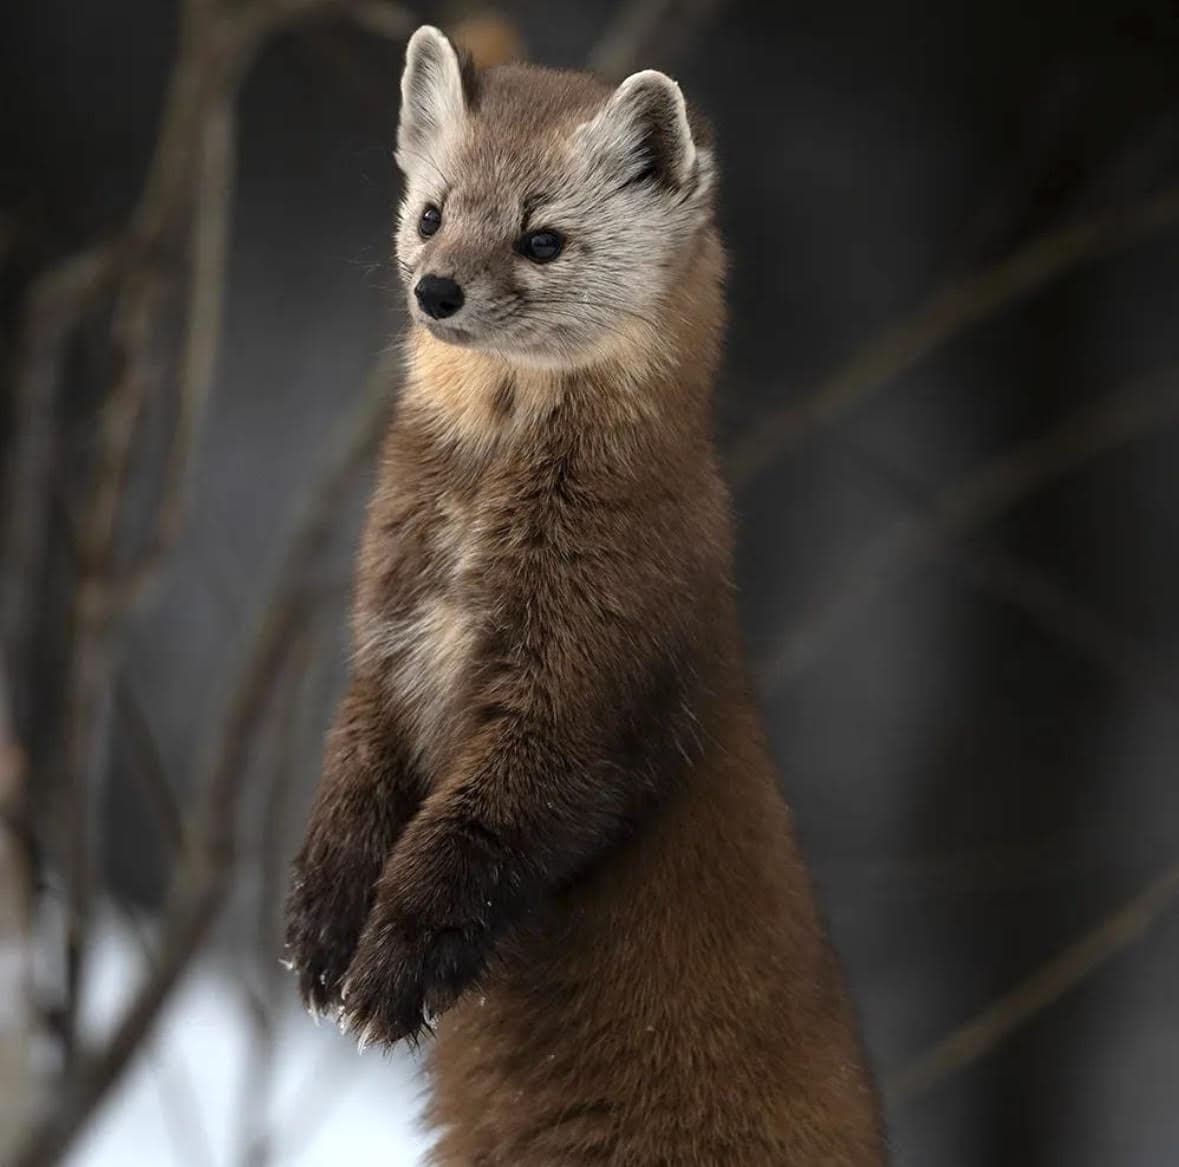 An American marten stands upright, popping out from the snow.